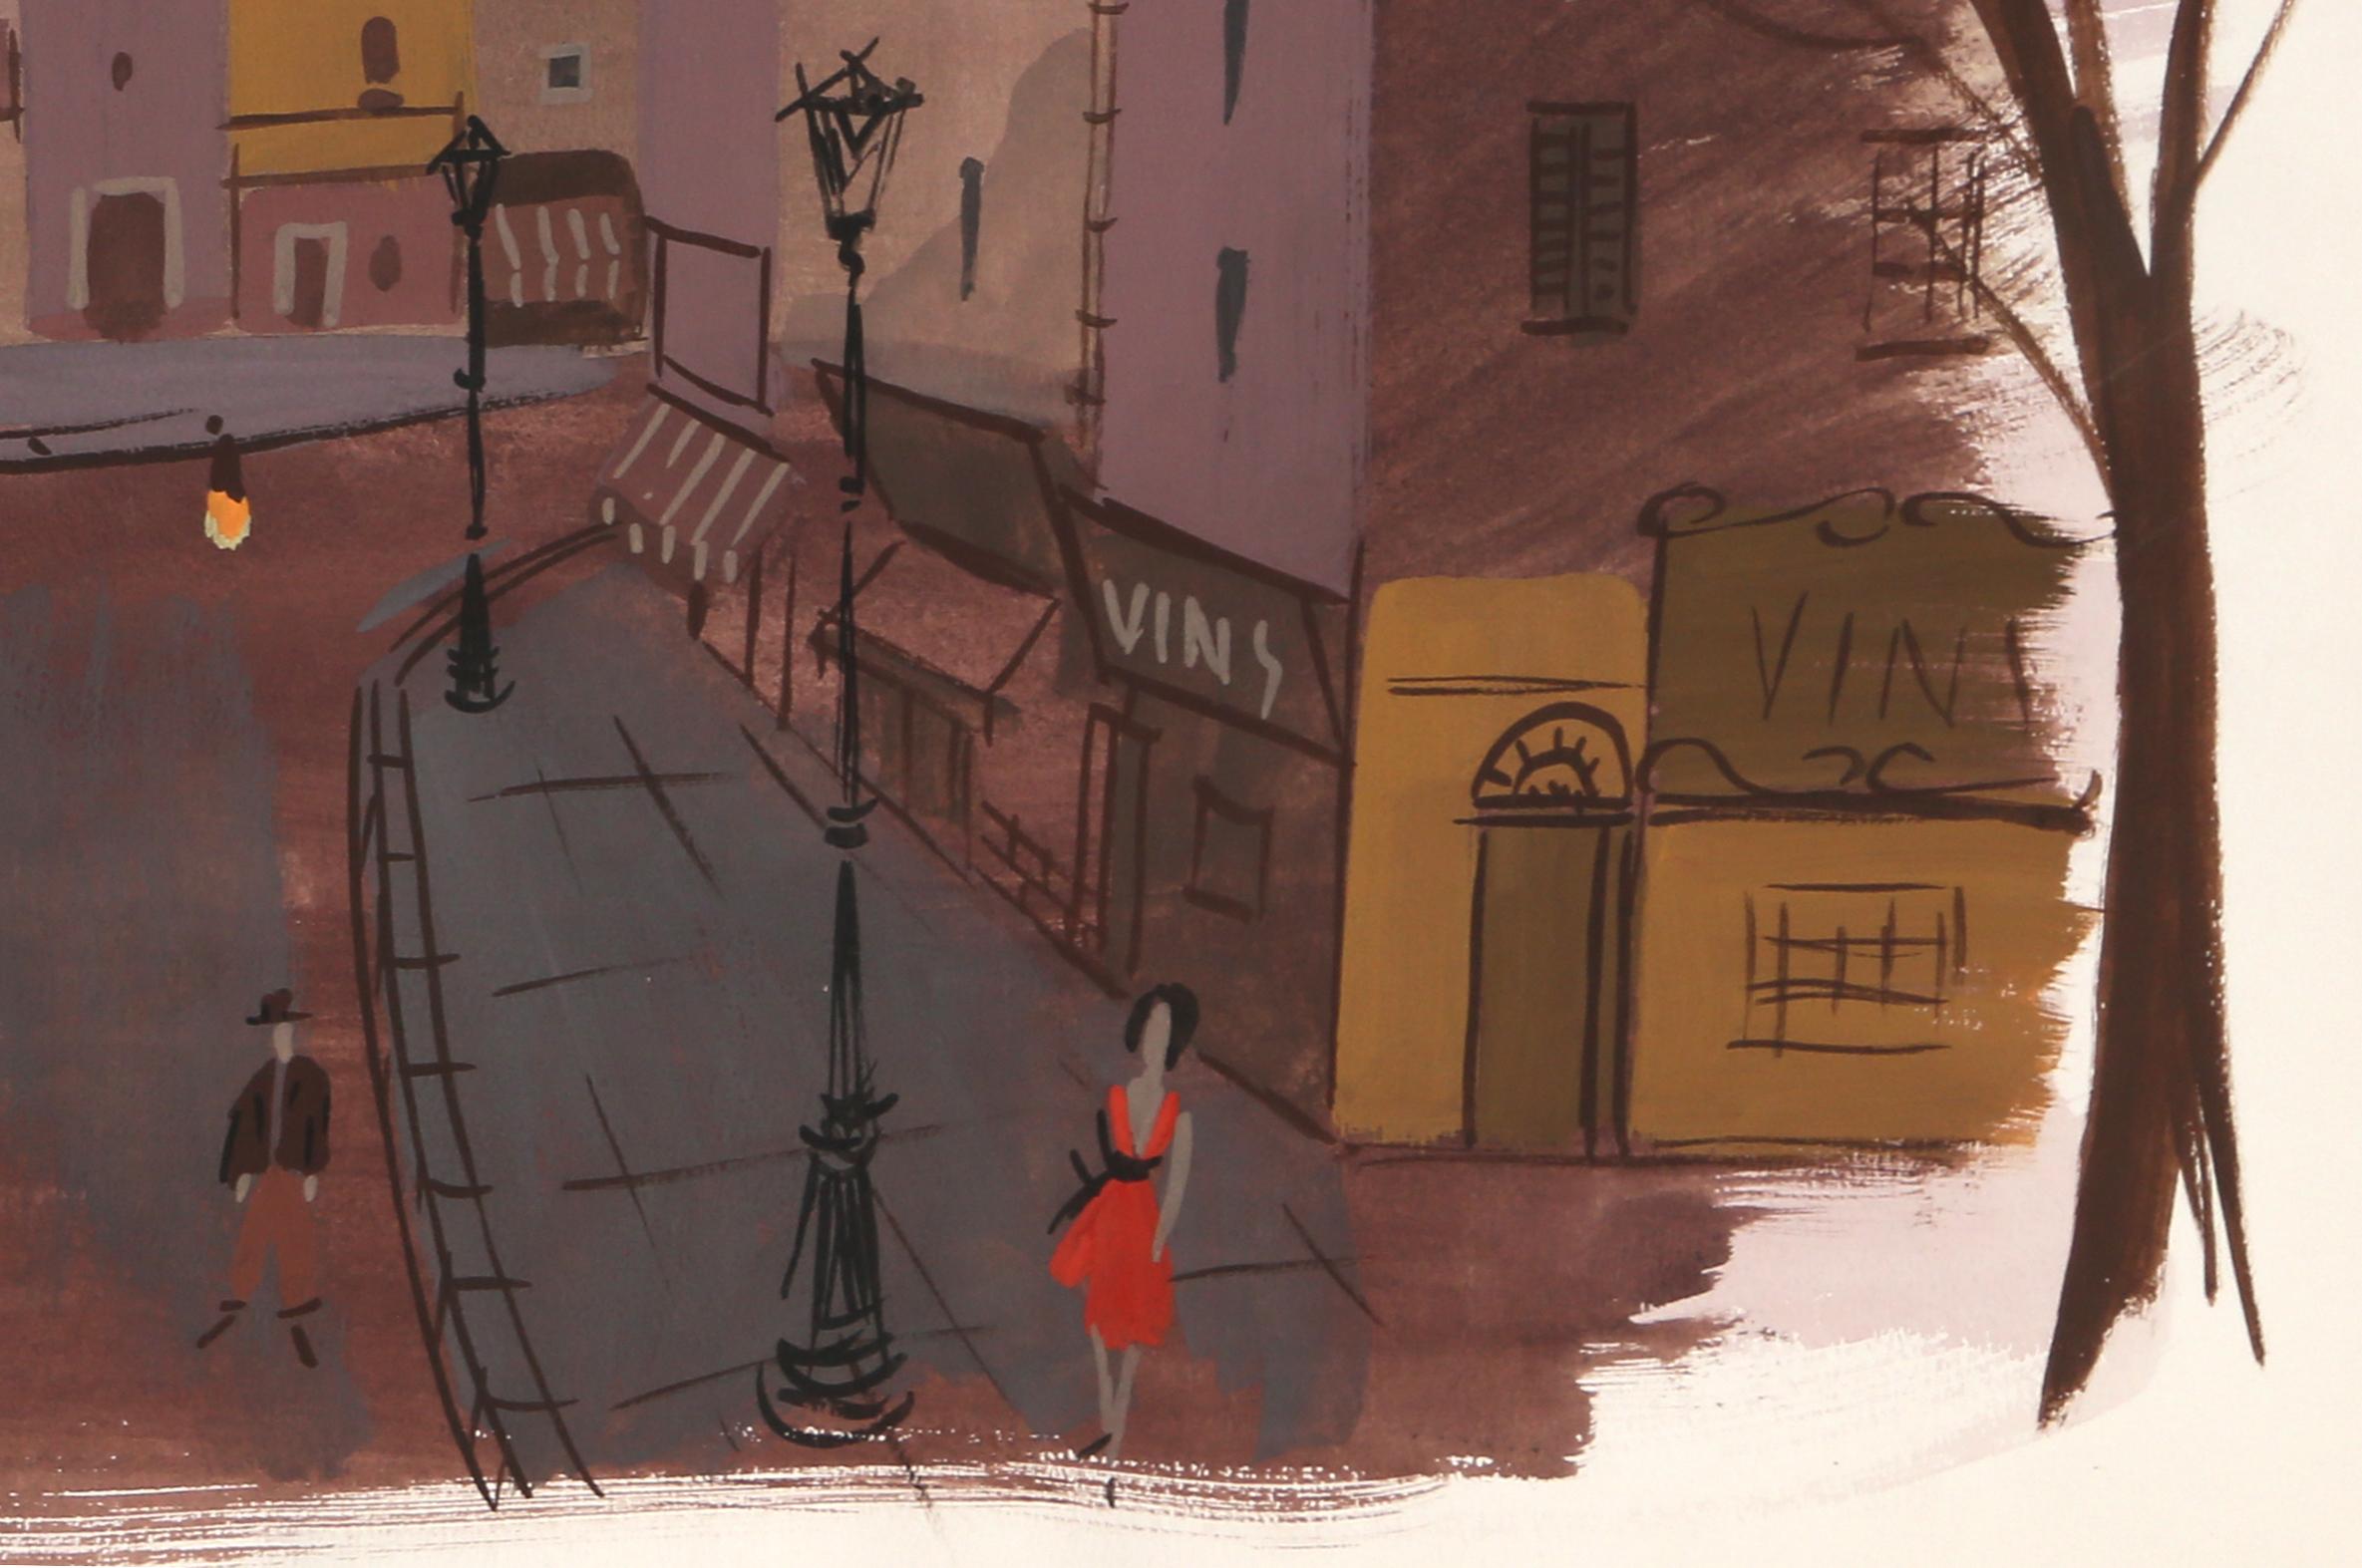 Artist: Charles Levier, French (1920 - 2003)
Title:  Paris Street Scene
Year: circa 1960
Medium: Watercolor, signed l.l.
Size: 22 x 30 in. (55.88 x 76.2 cm)